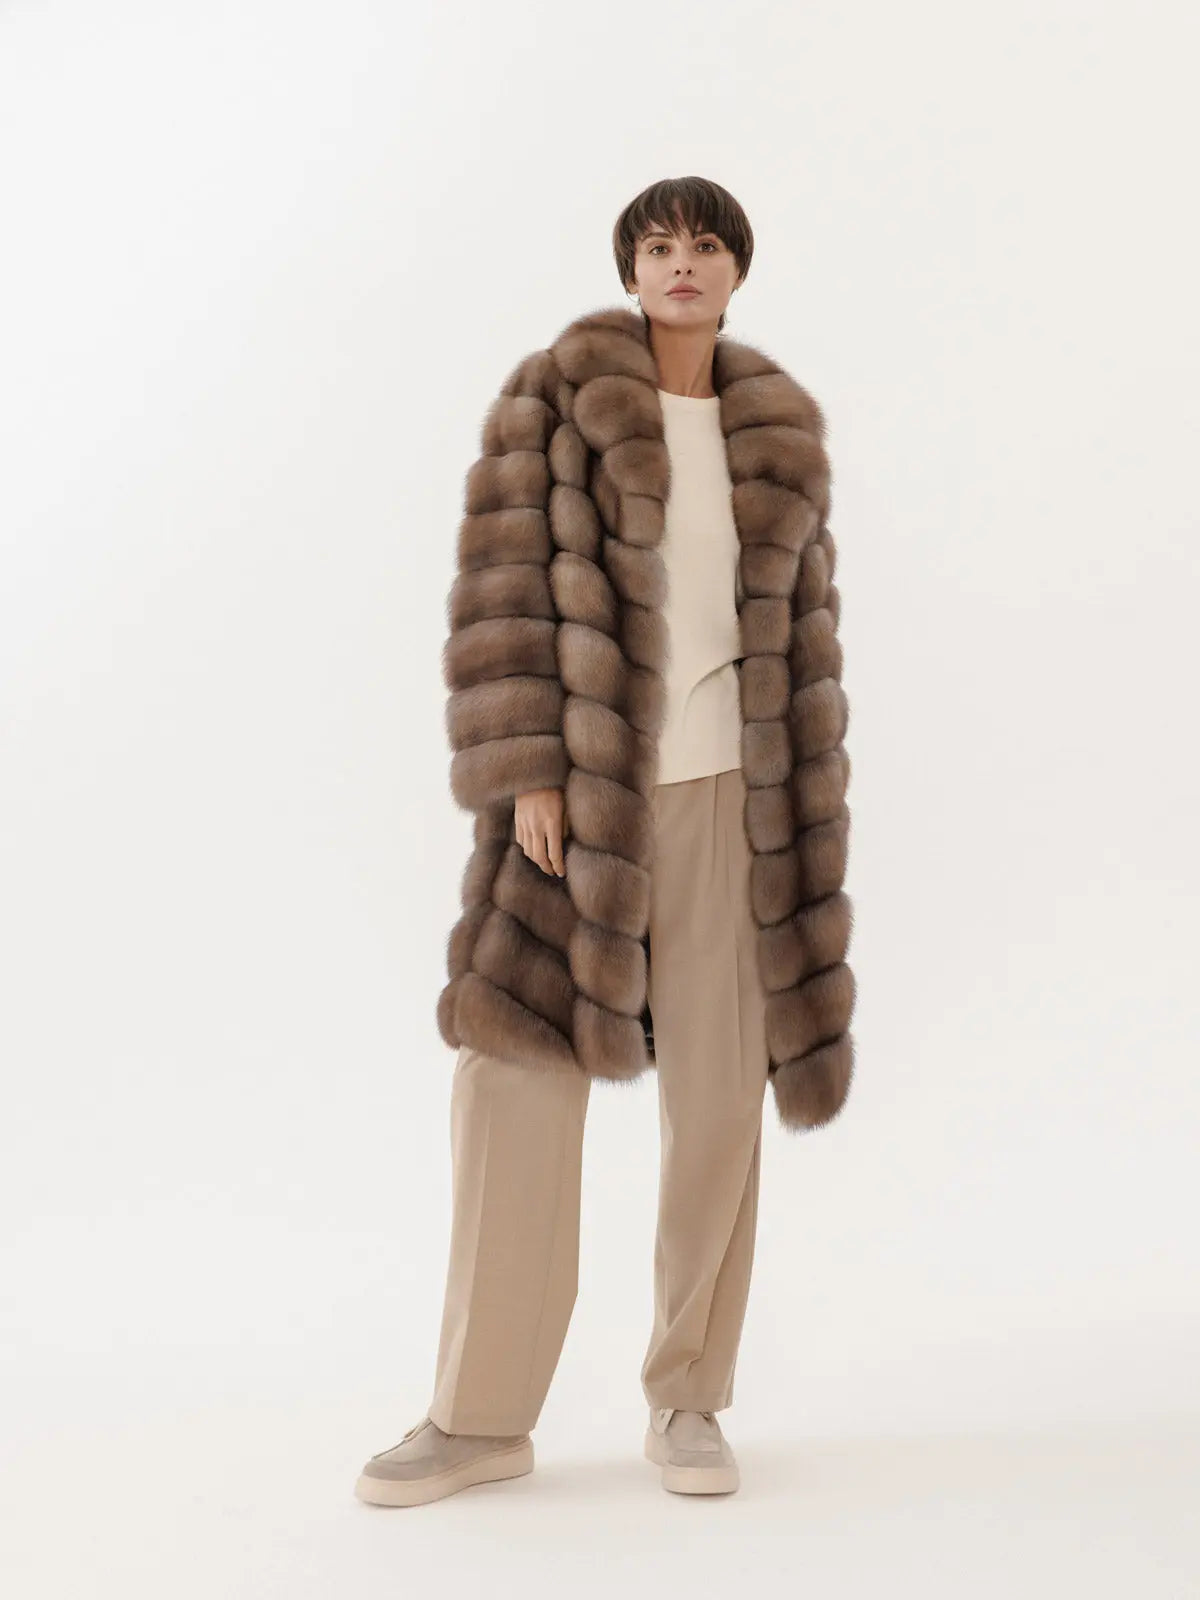 Marten coat with stand-up collar